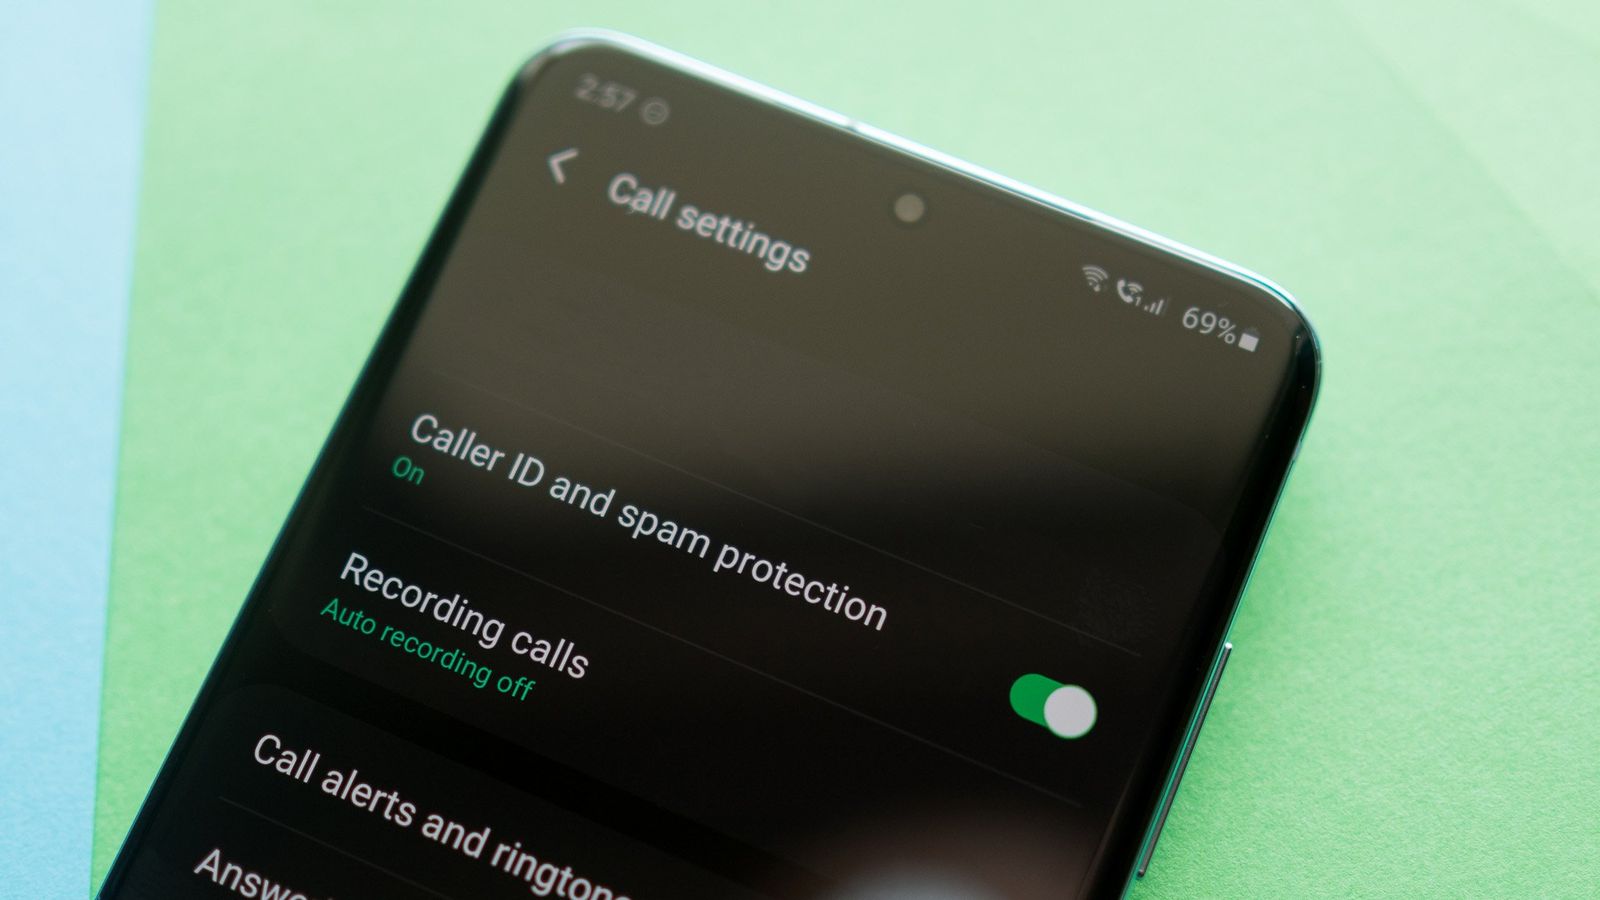 How to enable Caller ID and spam protection on the Galaxy S20